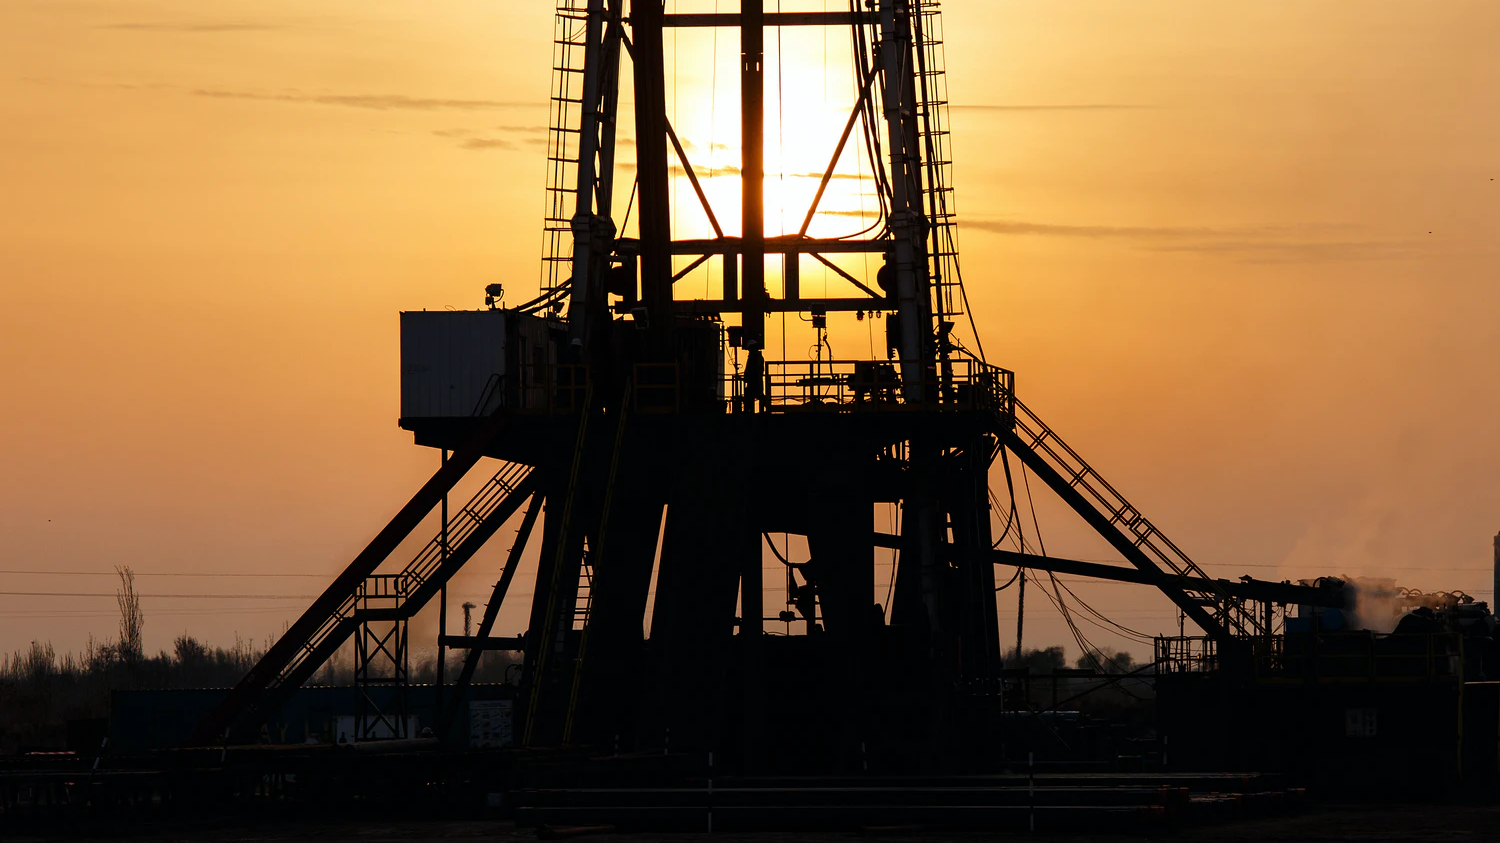 The sunset of hydrocarbons